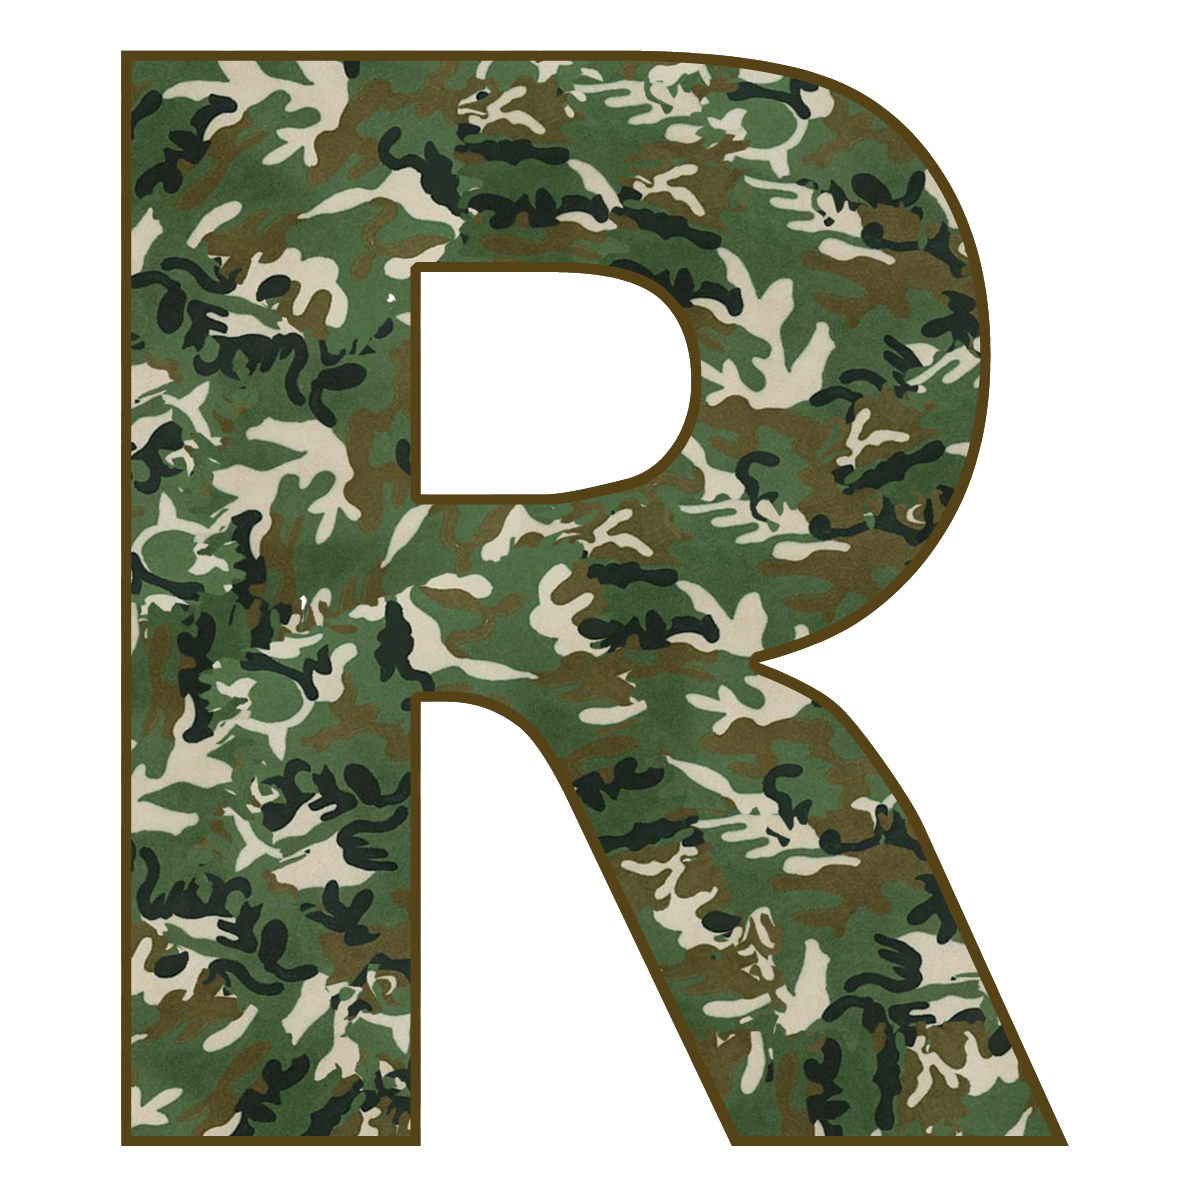 image-result-for-camouflage-letters-s-army-birthday-parties-camo